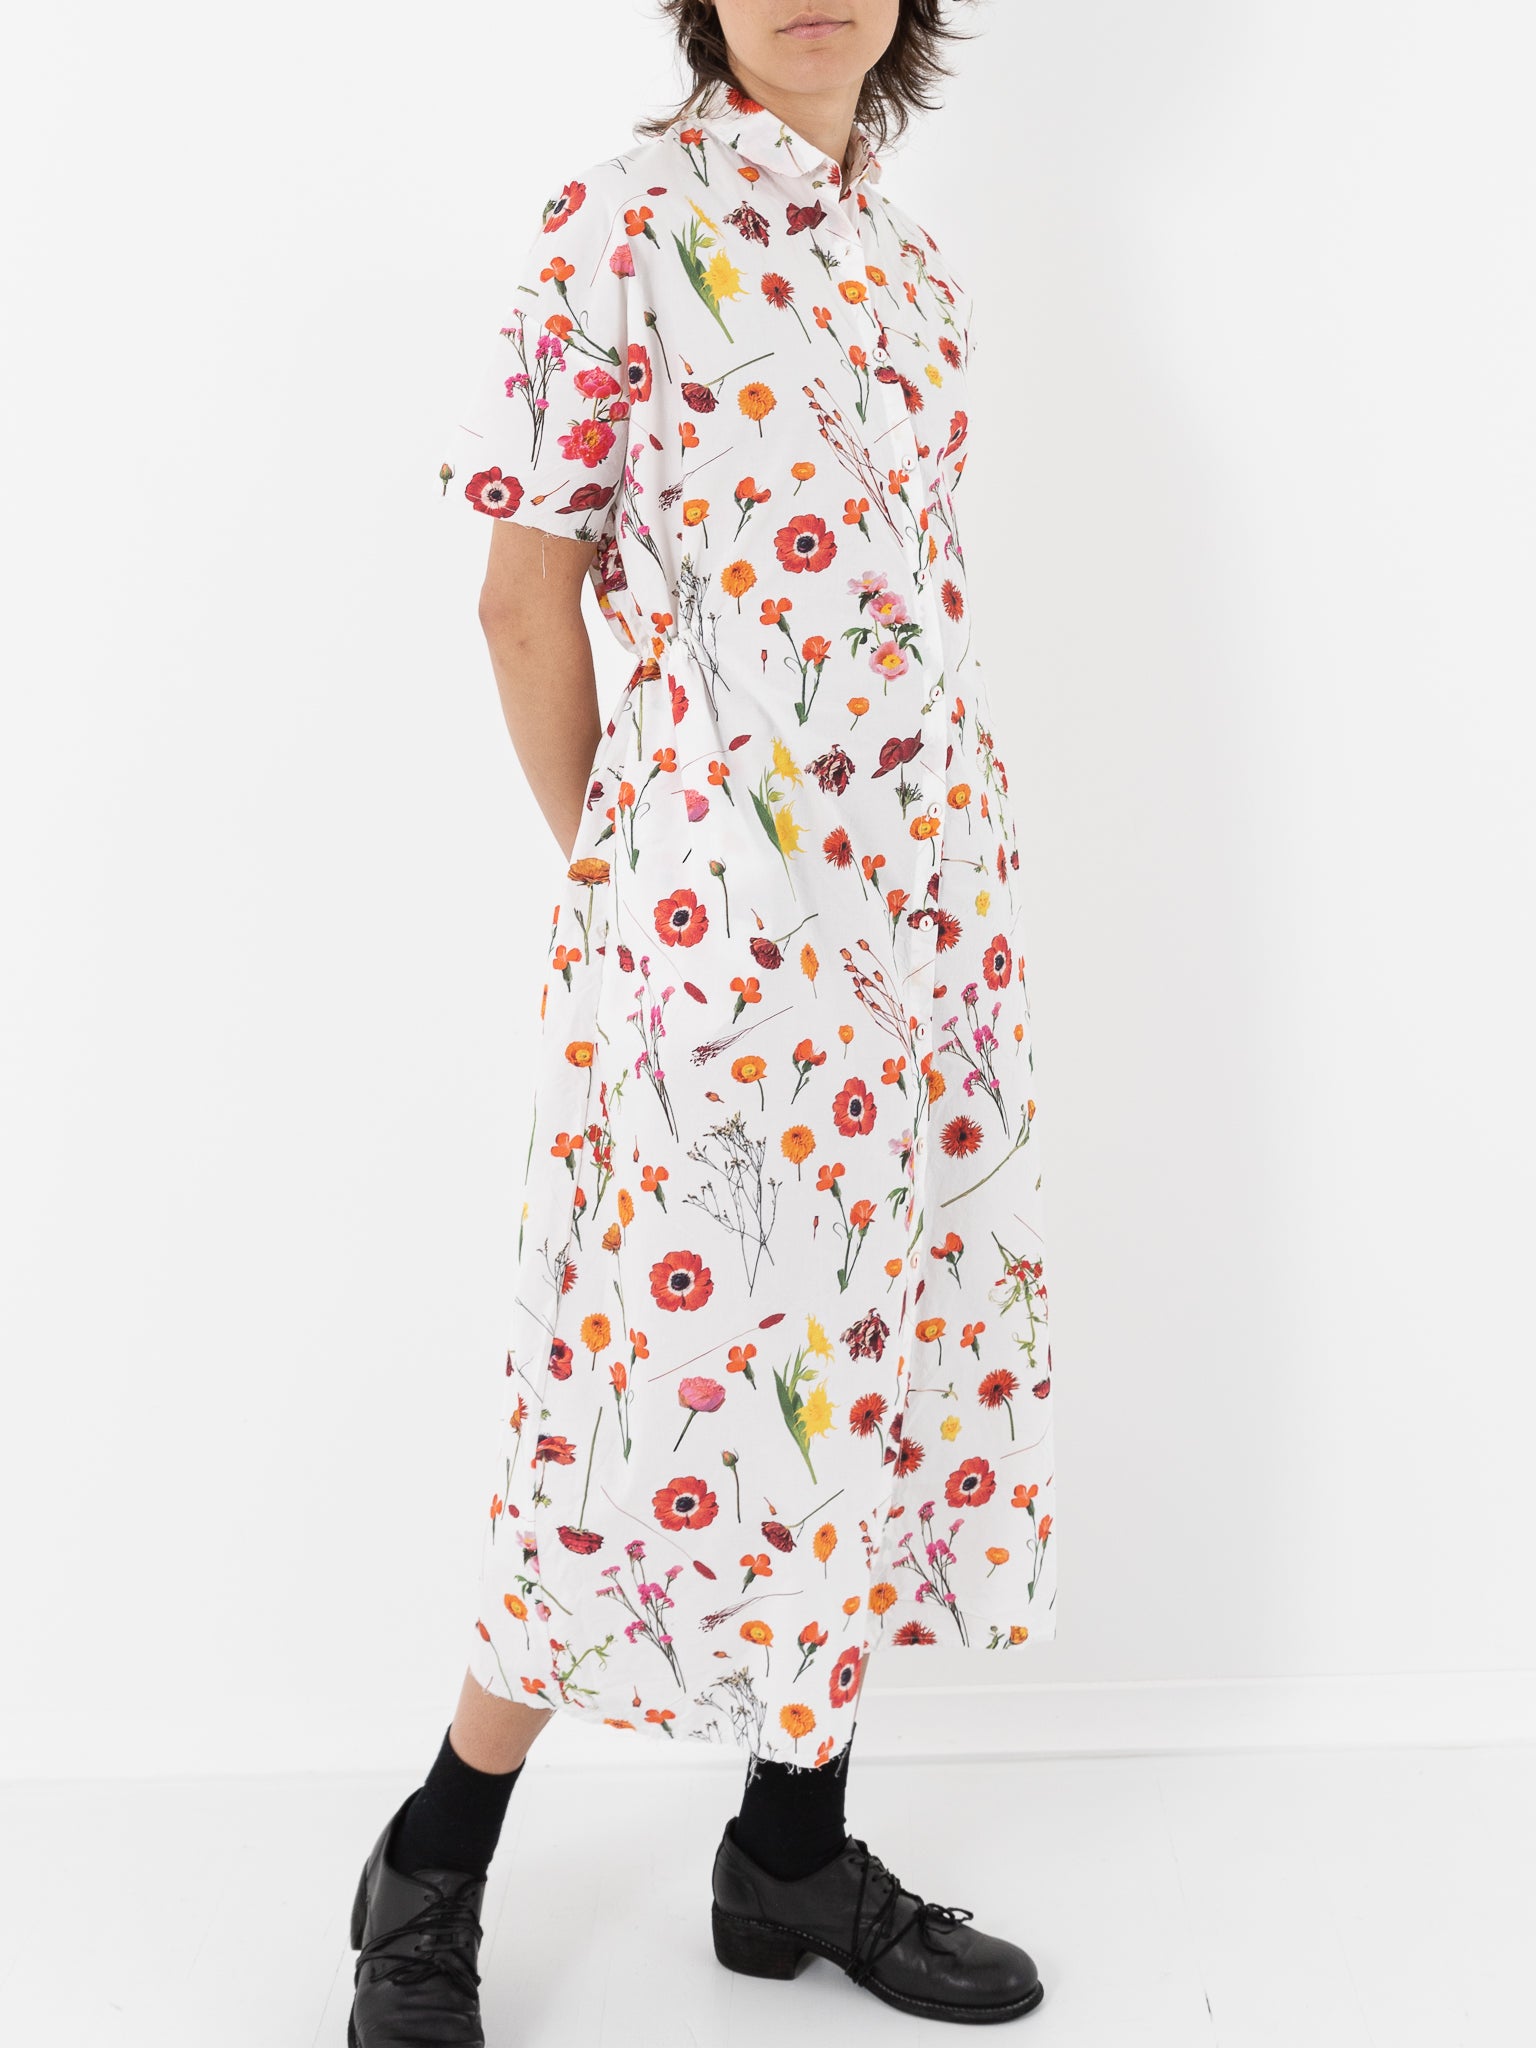 Hannoh Wessel Reana Dress, Red Flowers - Worthwhile, Inc.